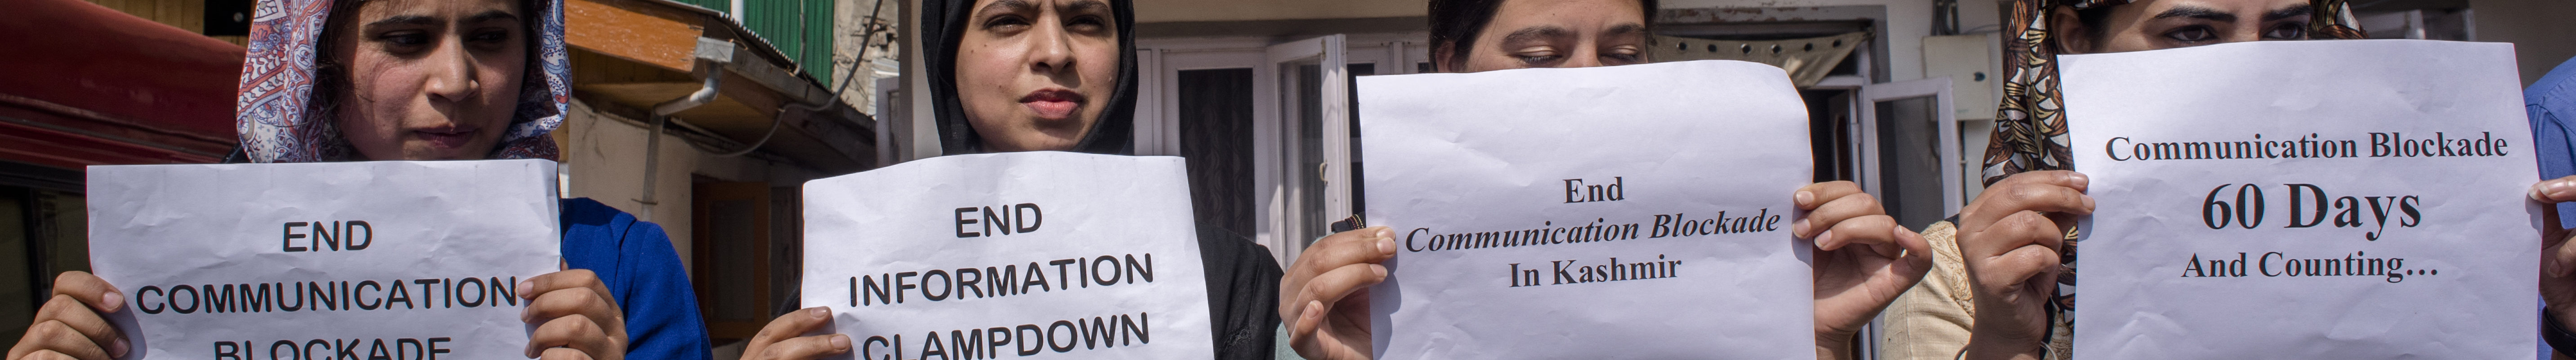 Kashmiri women journalists hold placards as they protest against the continued communication blockade by the Indian authorities after the revocation of special status of Kashmir on October 3, 2019 in Srinagar, the summer capital of Indian administered Kashmir, India. Signs read, “End communication blockade,” “End information clampdown,” “End communication blockade in Kashmir,” and “Communication blockade 60 days and counting…”